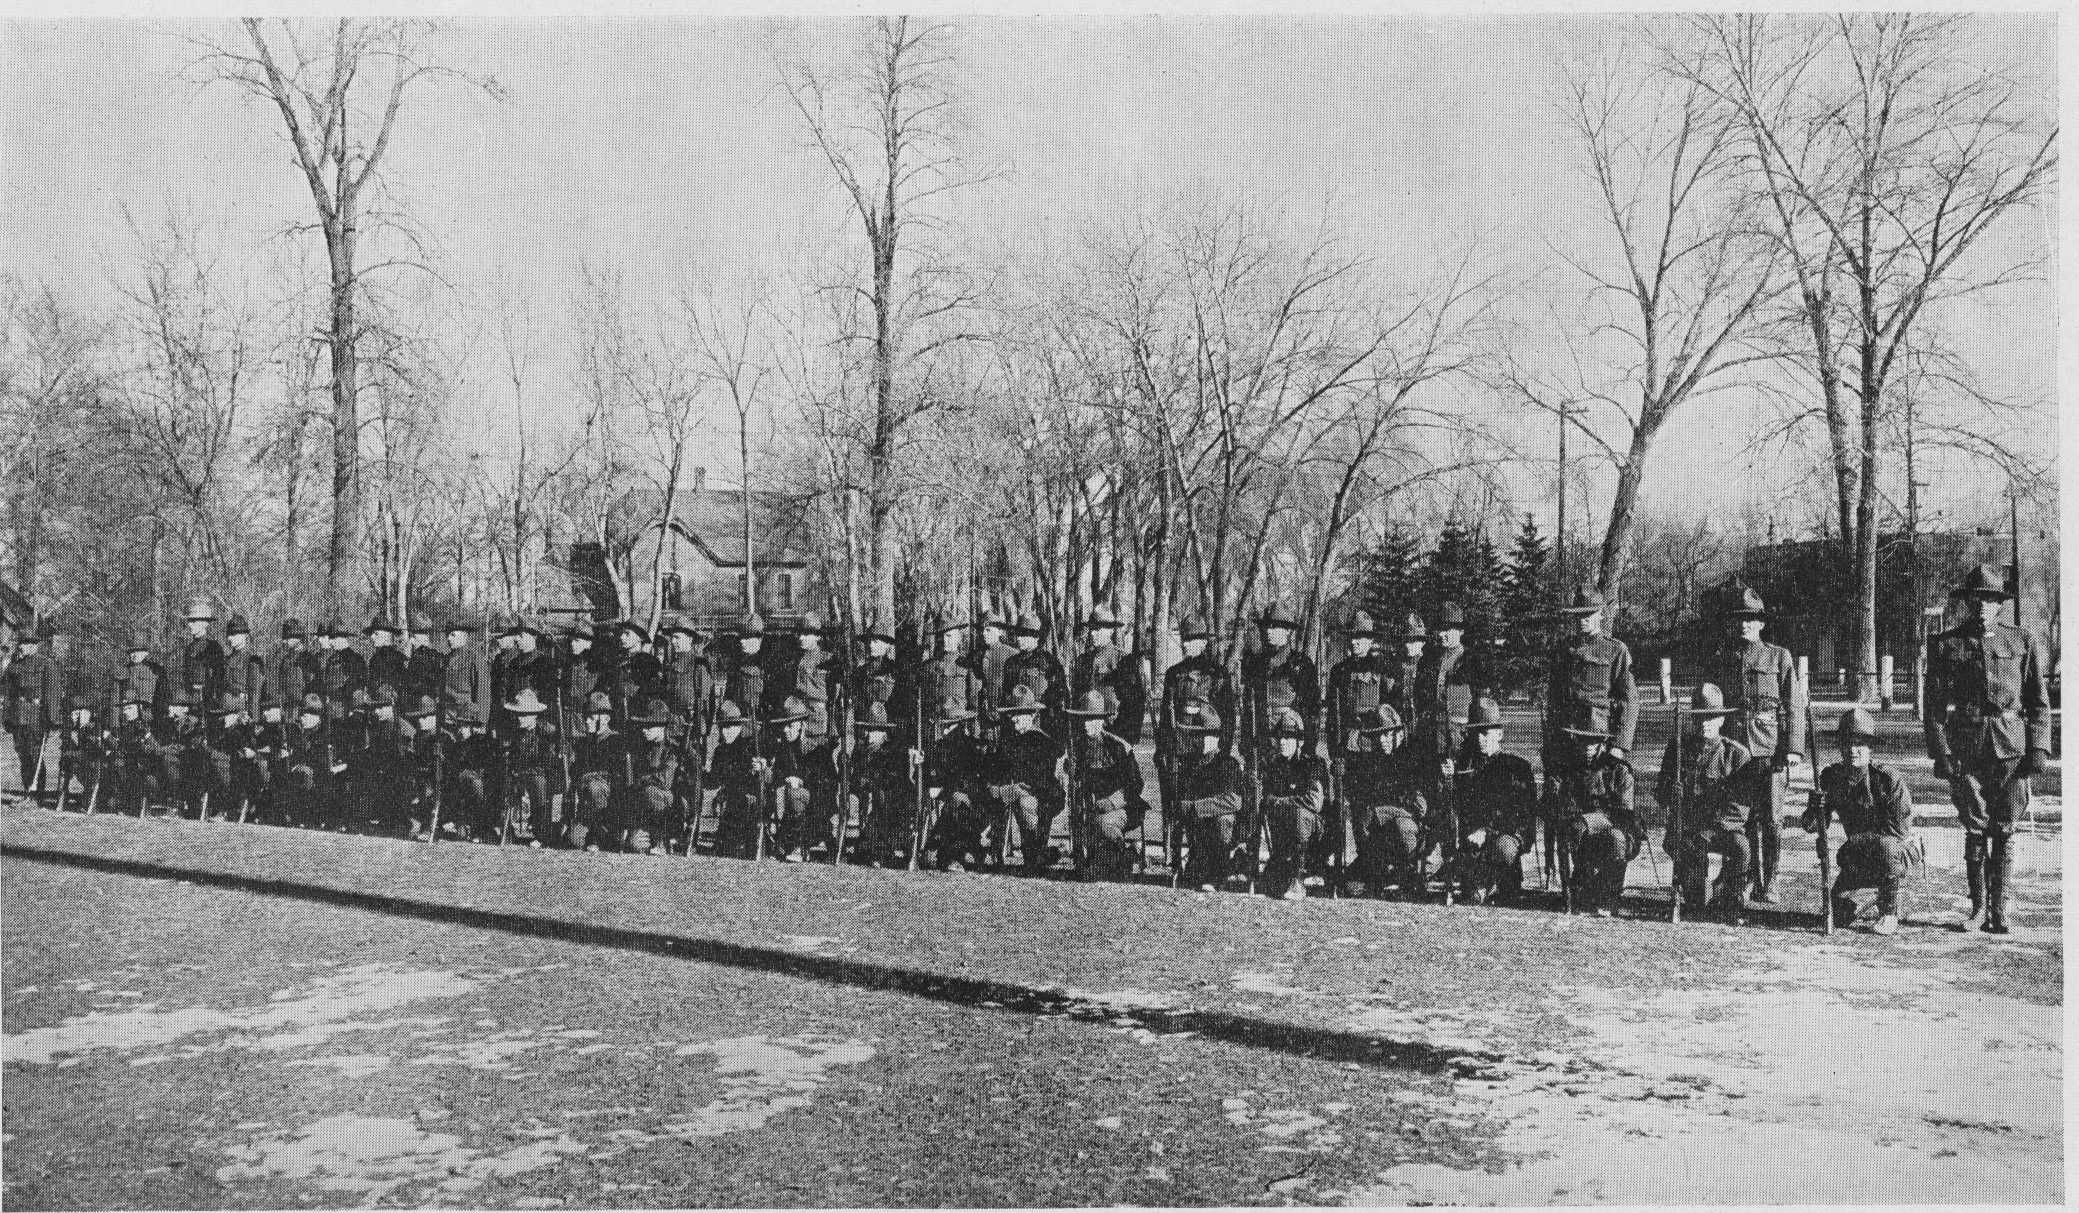 csu historical photo of the military lined up with face masks